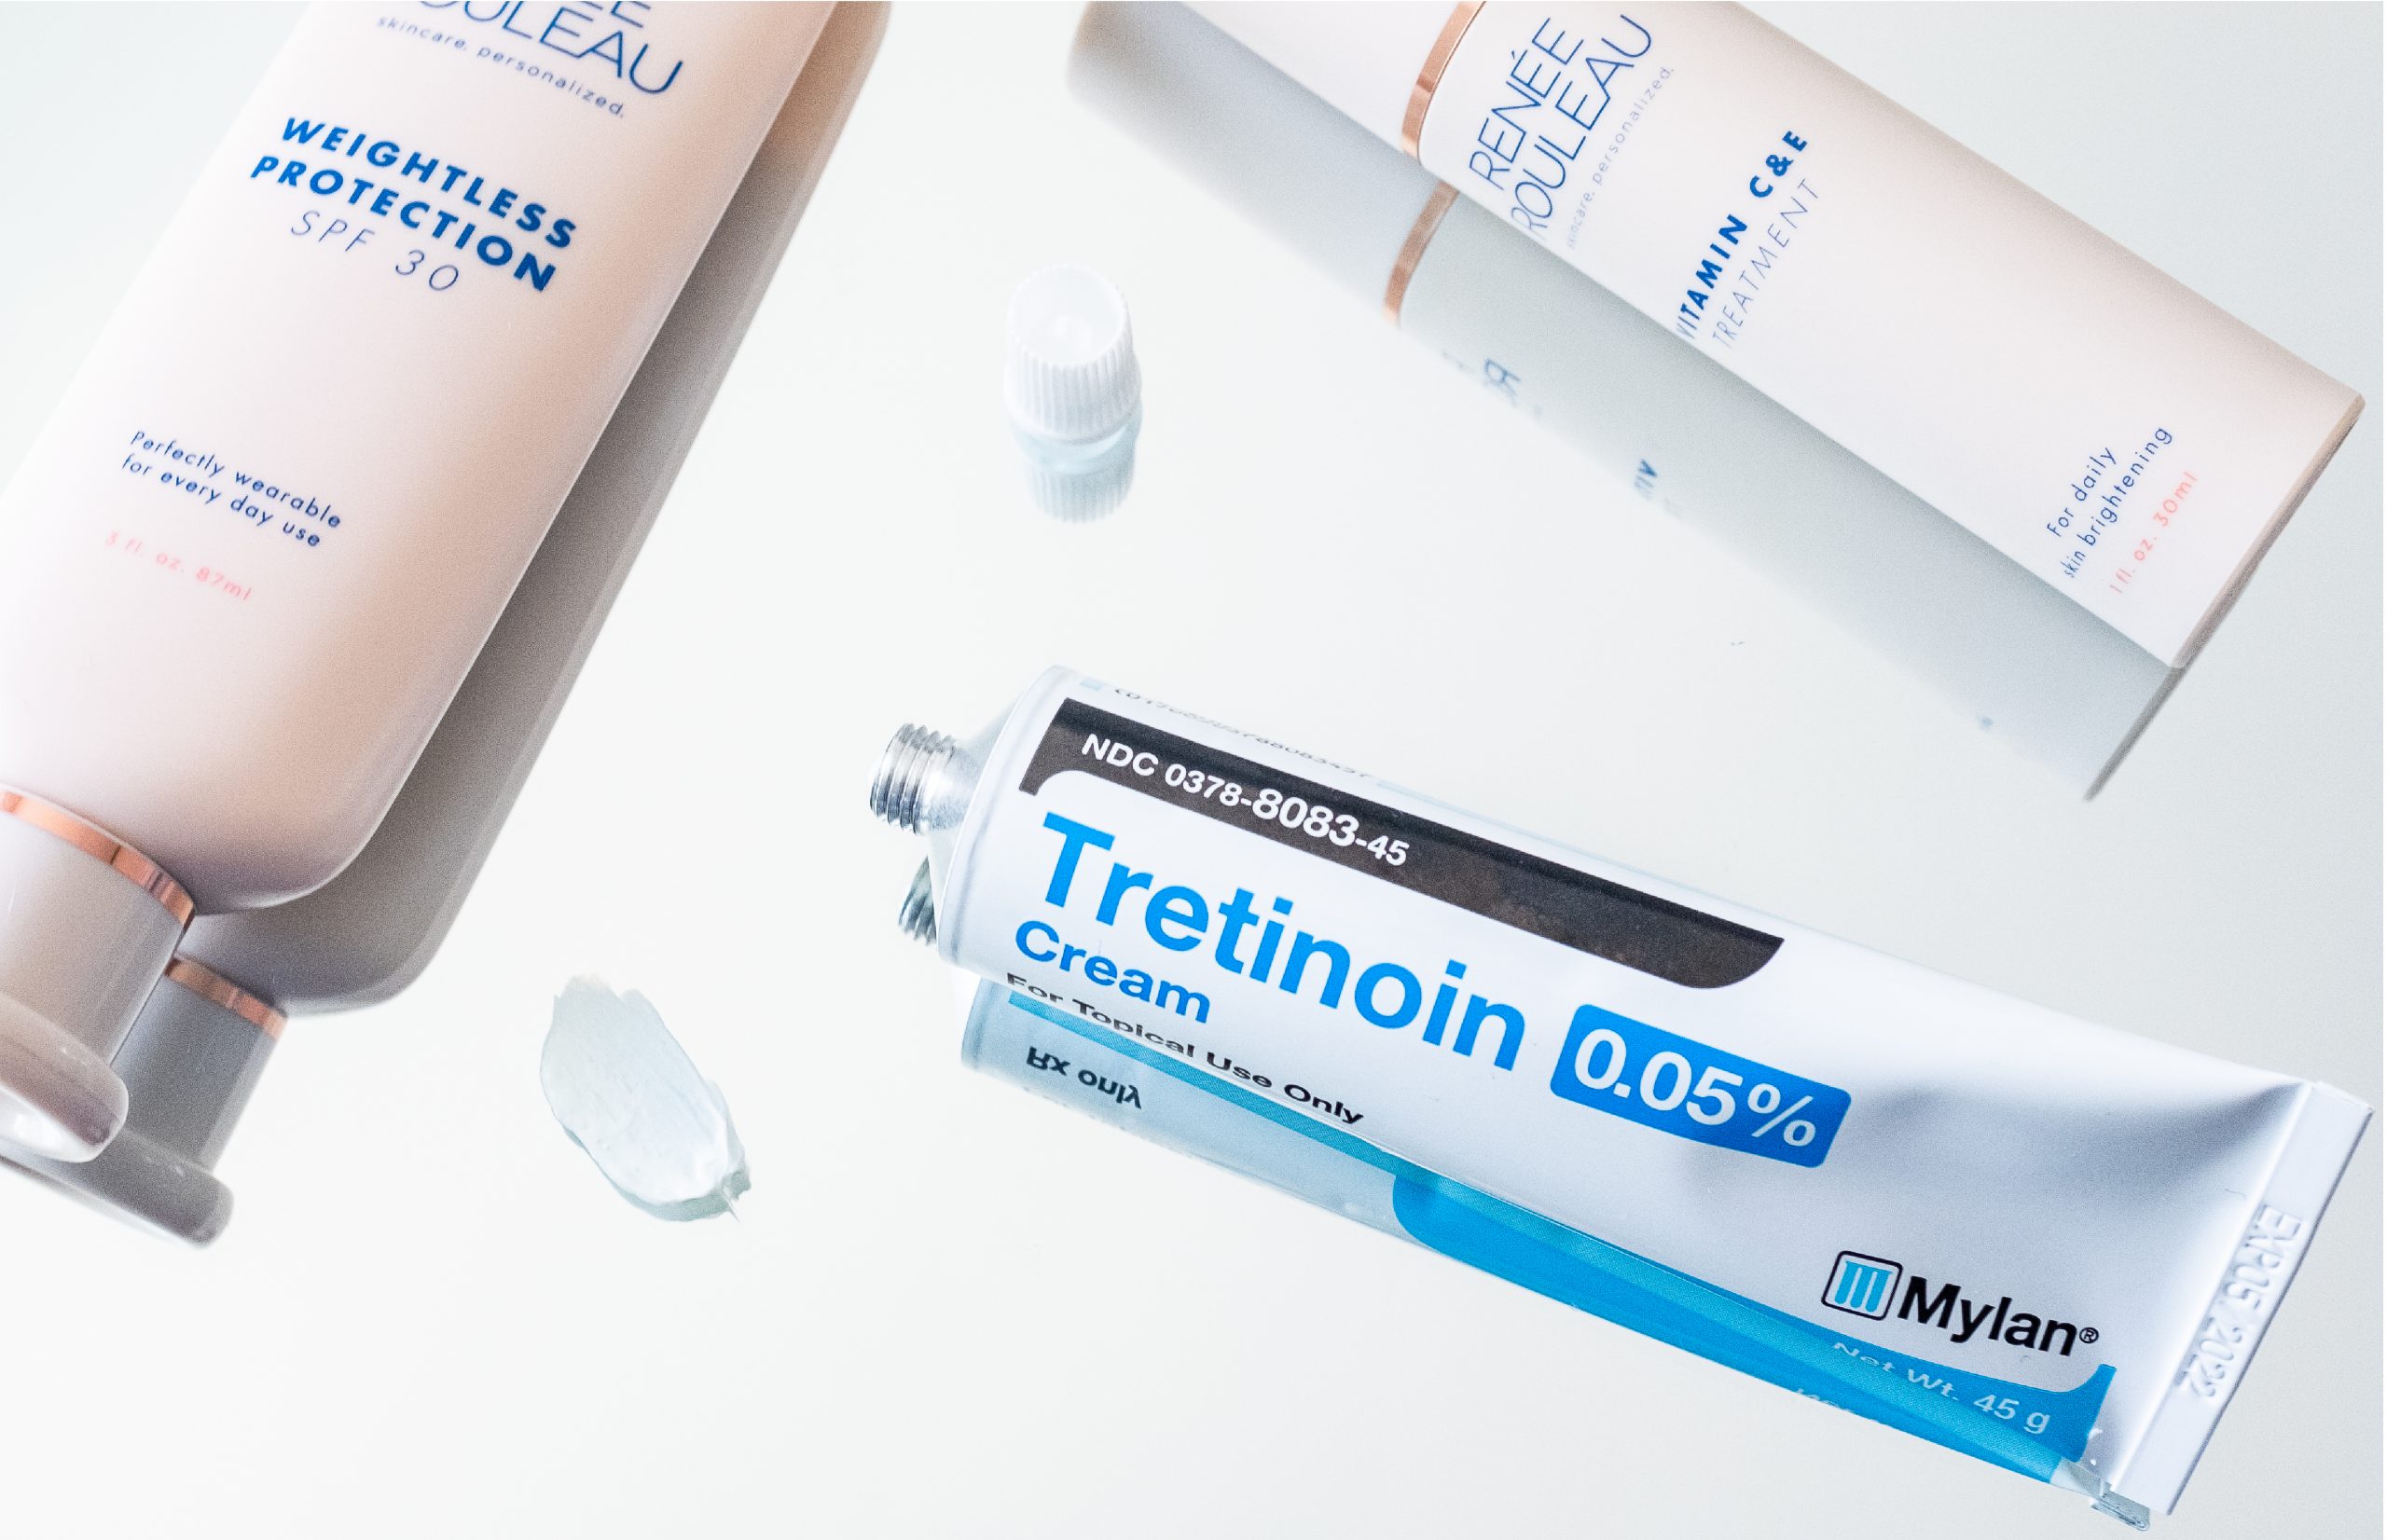 How to Use a Prescription Retinoid in Your Skincare Routine